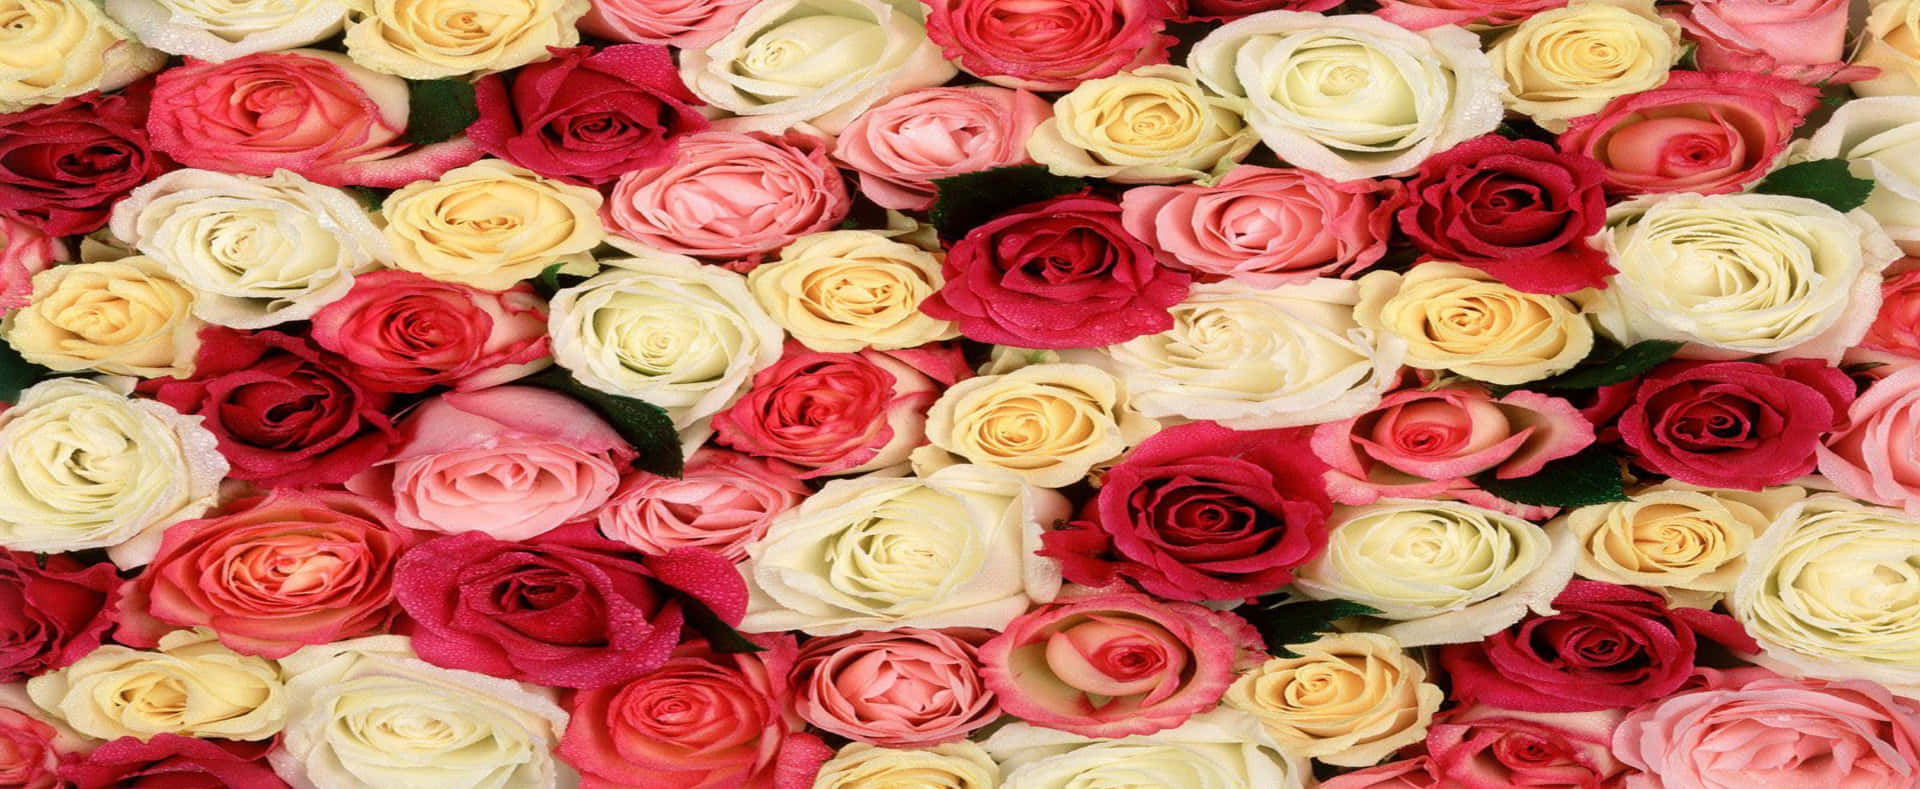 Download 3440x1440p Roses Background | Wallpapers.com